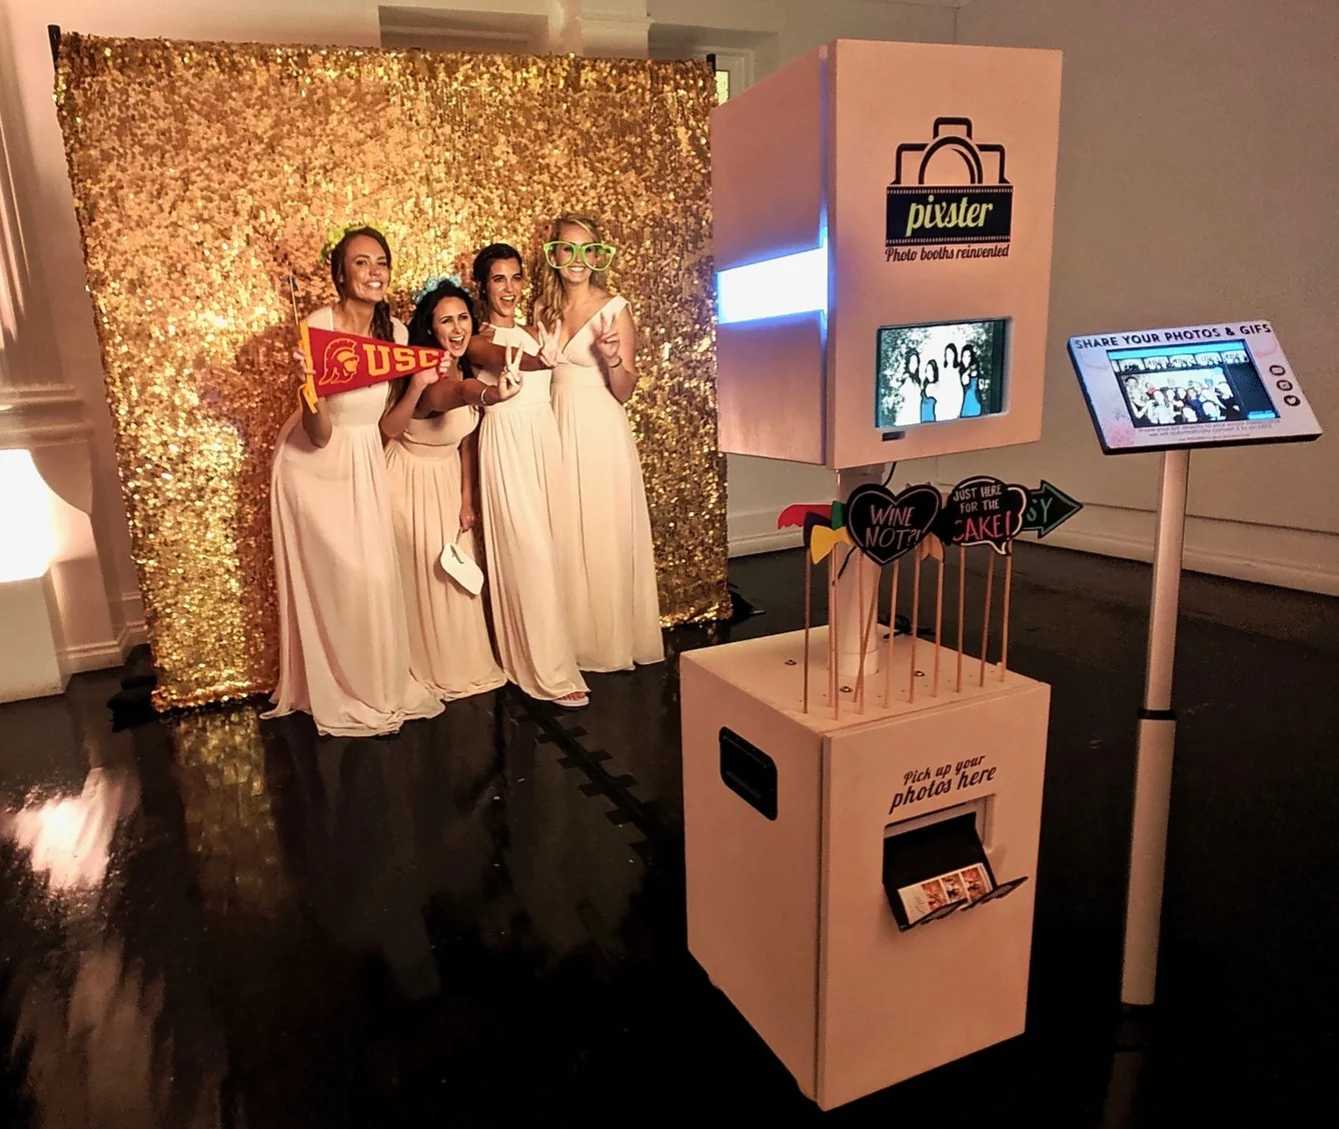 PROFESSIONAL PHOTOGRAPHY AND PHOTO BOOTH RENTALS: ADDING FLAIR TO YOUR RHODE ISLAND EVENTS